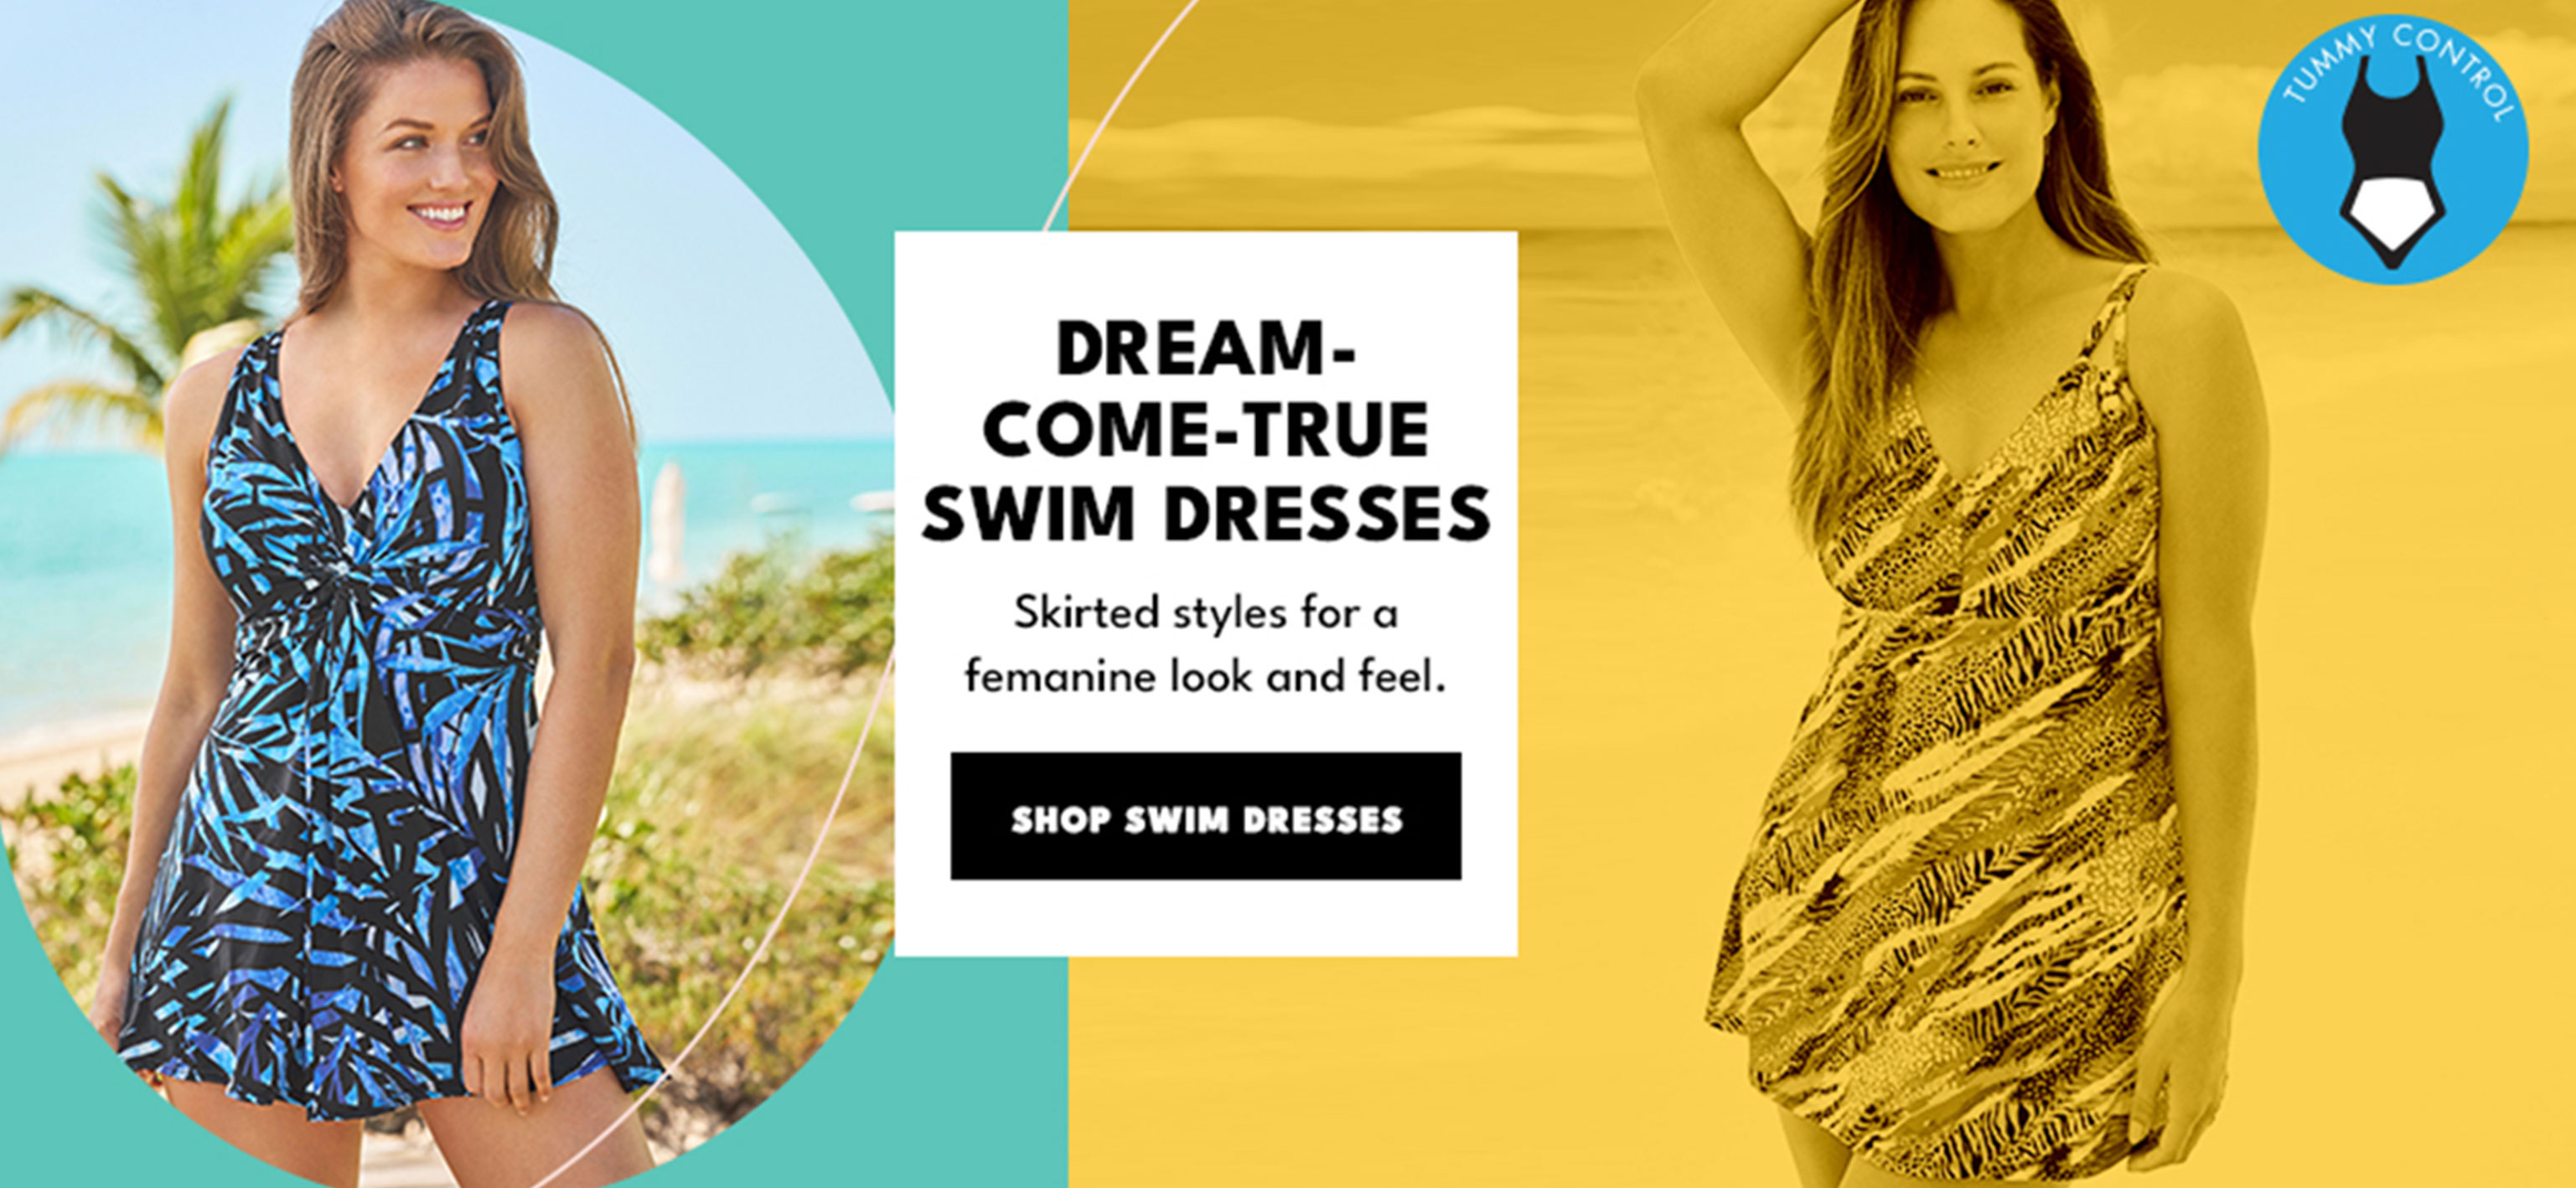 The comfiest cover-ups easy layers fr pool to park to beach & beyond! Shop Cover-ups